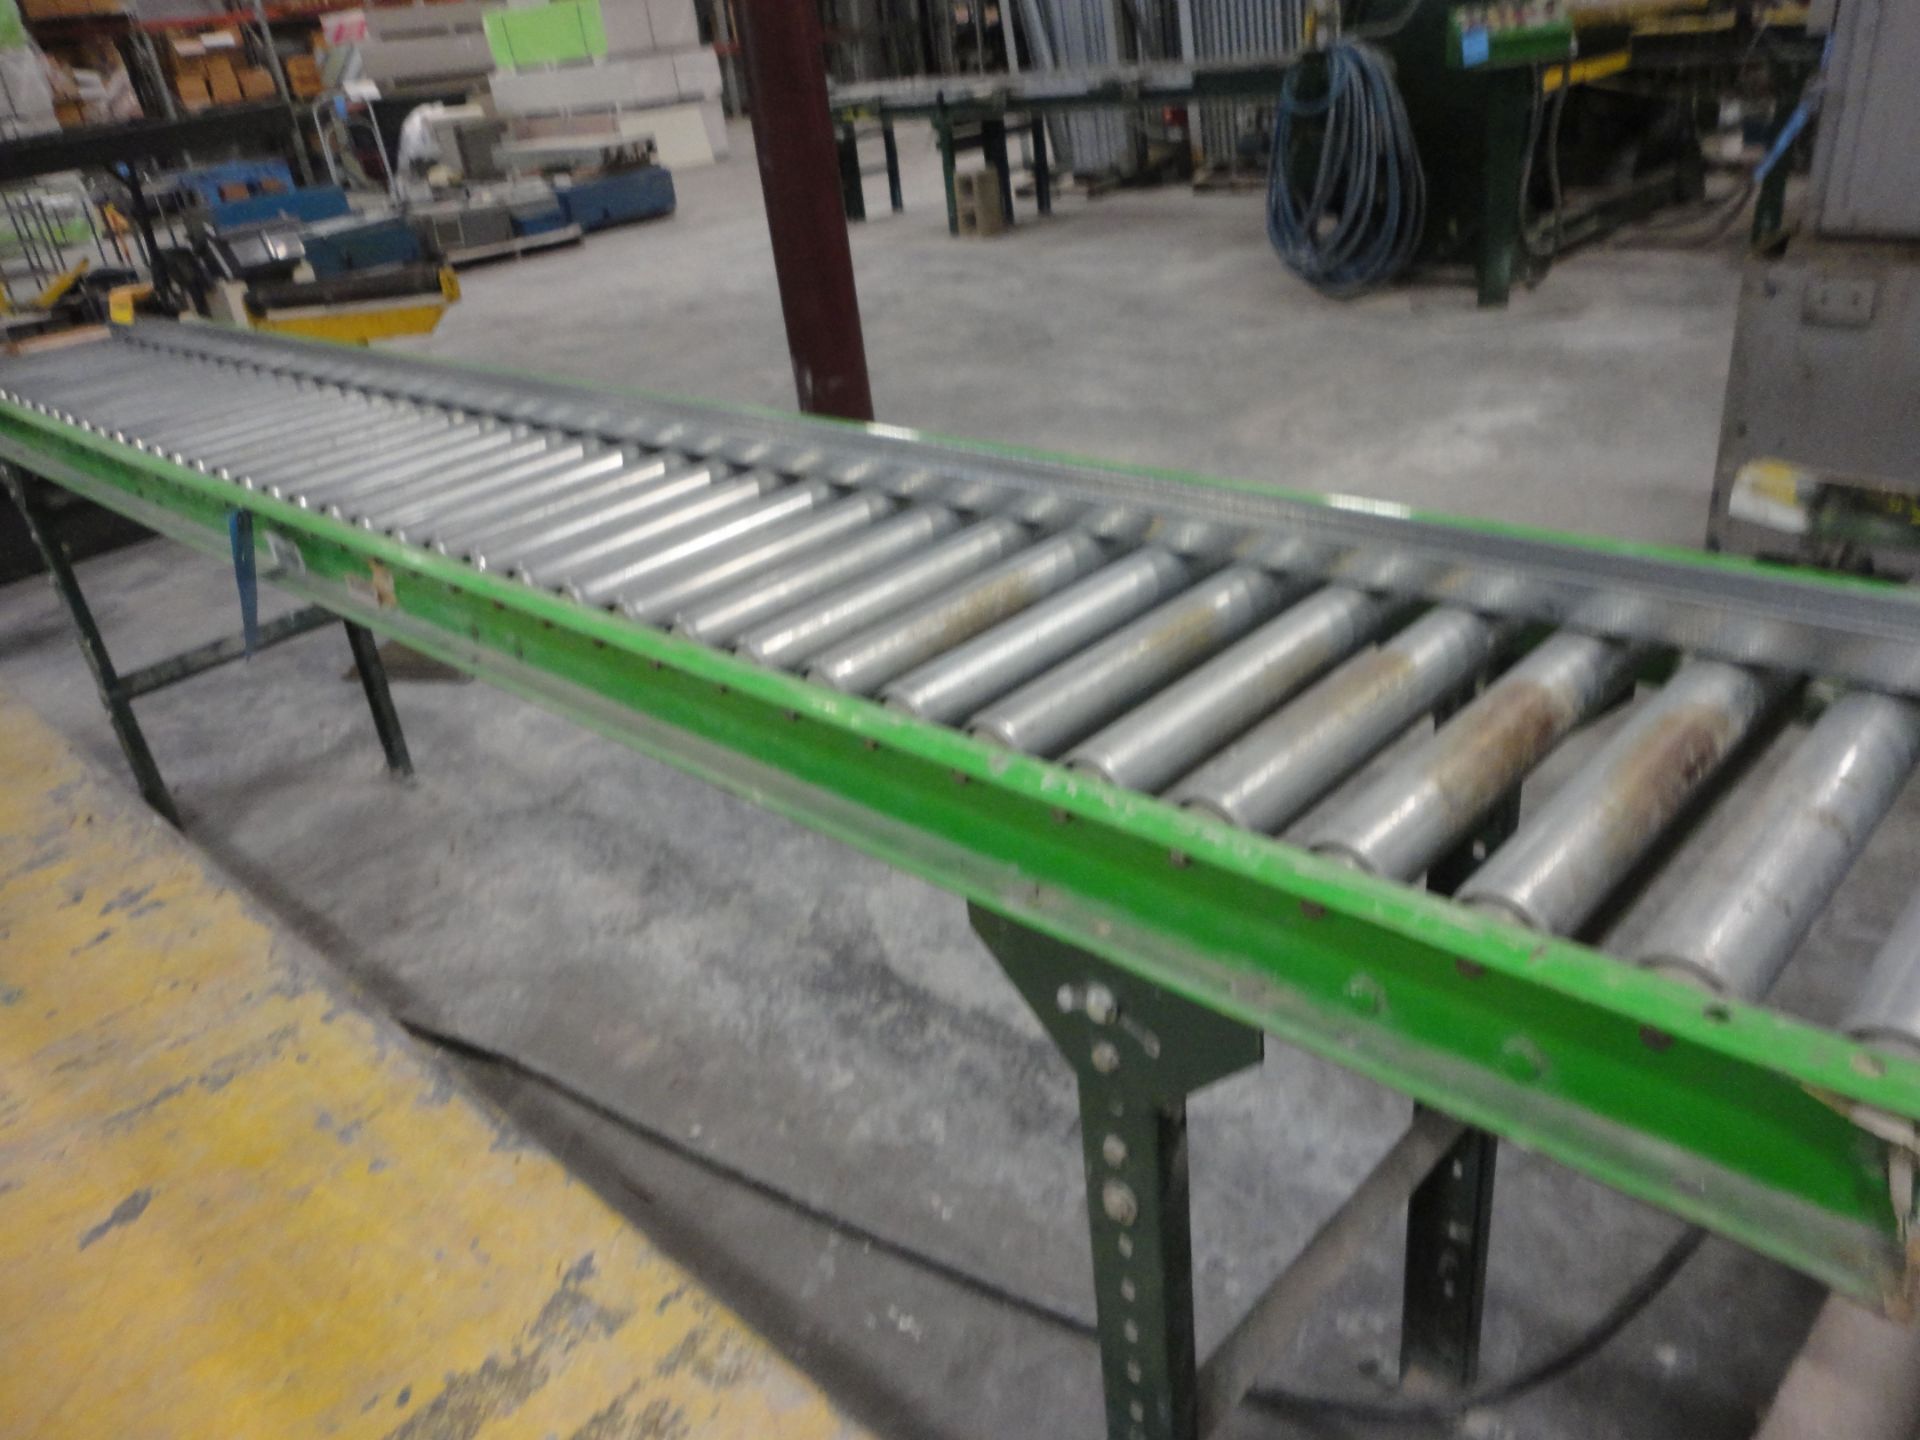 60" WIDE VINYL TO PANEL APPLICATION MACHINE ENTRY PINCH ROLLS, OVERHEAD VINYL ROLL FEED TO GLUE - Image 19 of 22